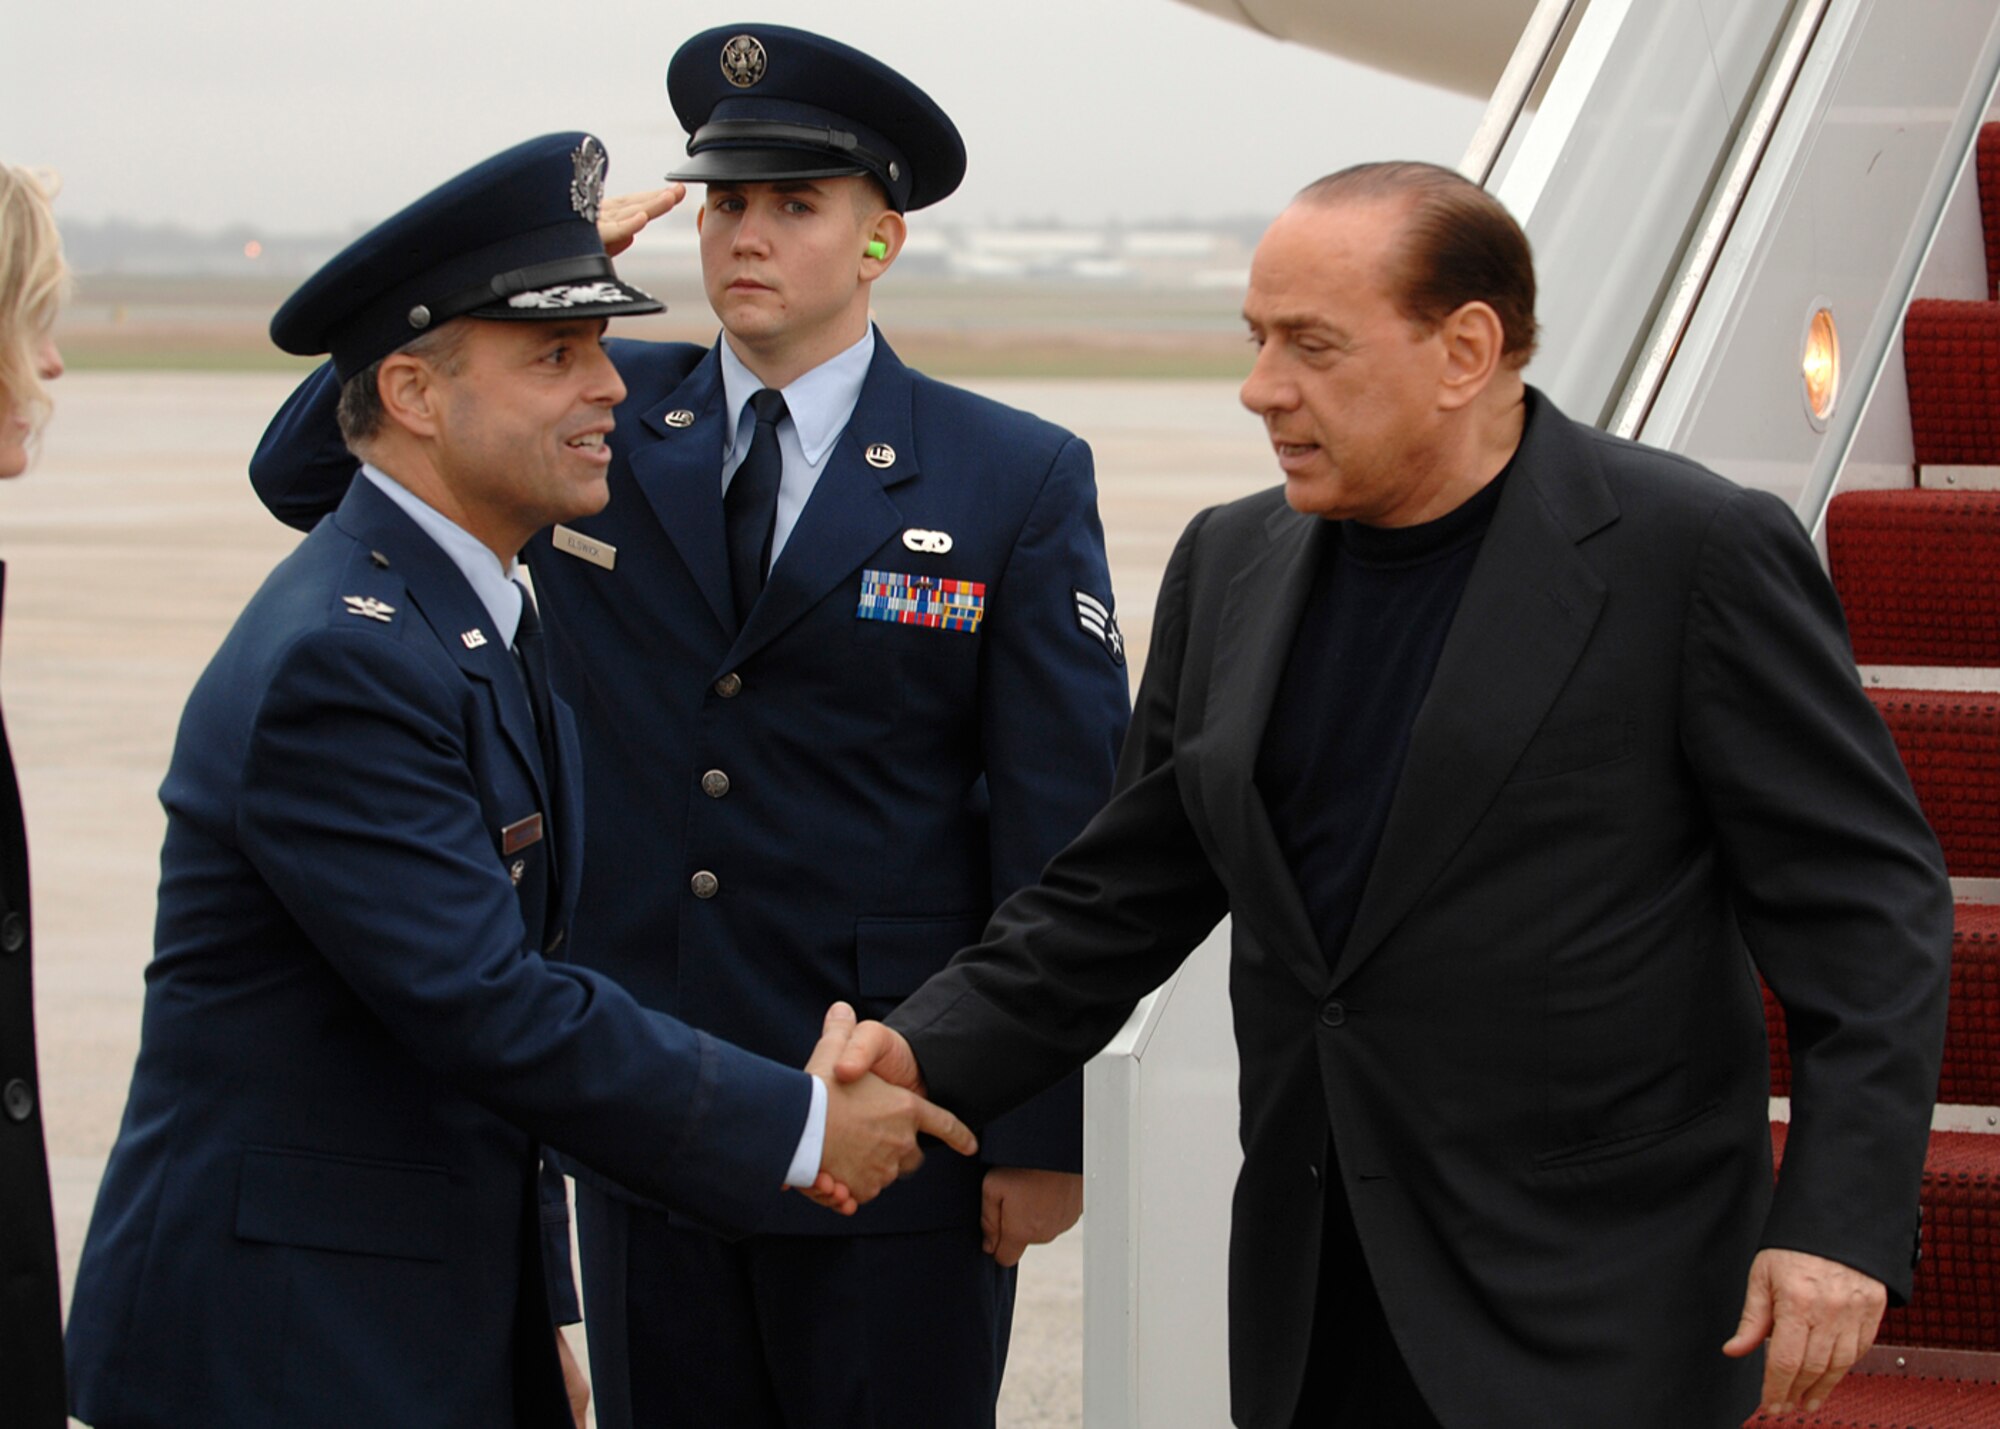 Colonel Eric A. Snadecki, 316th Wing vice commander, greets Italian Prime Minister Silvio Berlusconi at Andrews Air Force Base, Md., Nov. 14, 2008, for the two-day G20 Summit at the White House in Washington. The summit, hosted by U.S. President George W. Bush, will bring together world leaders to discuss the increasing global financial crisis, its causes and efforts to resolve it. (U.S. Air Force photo by Tech. Sgt. Craig Clapper)